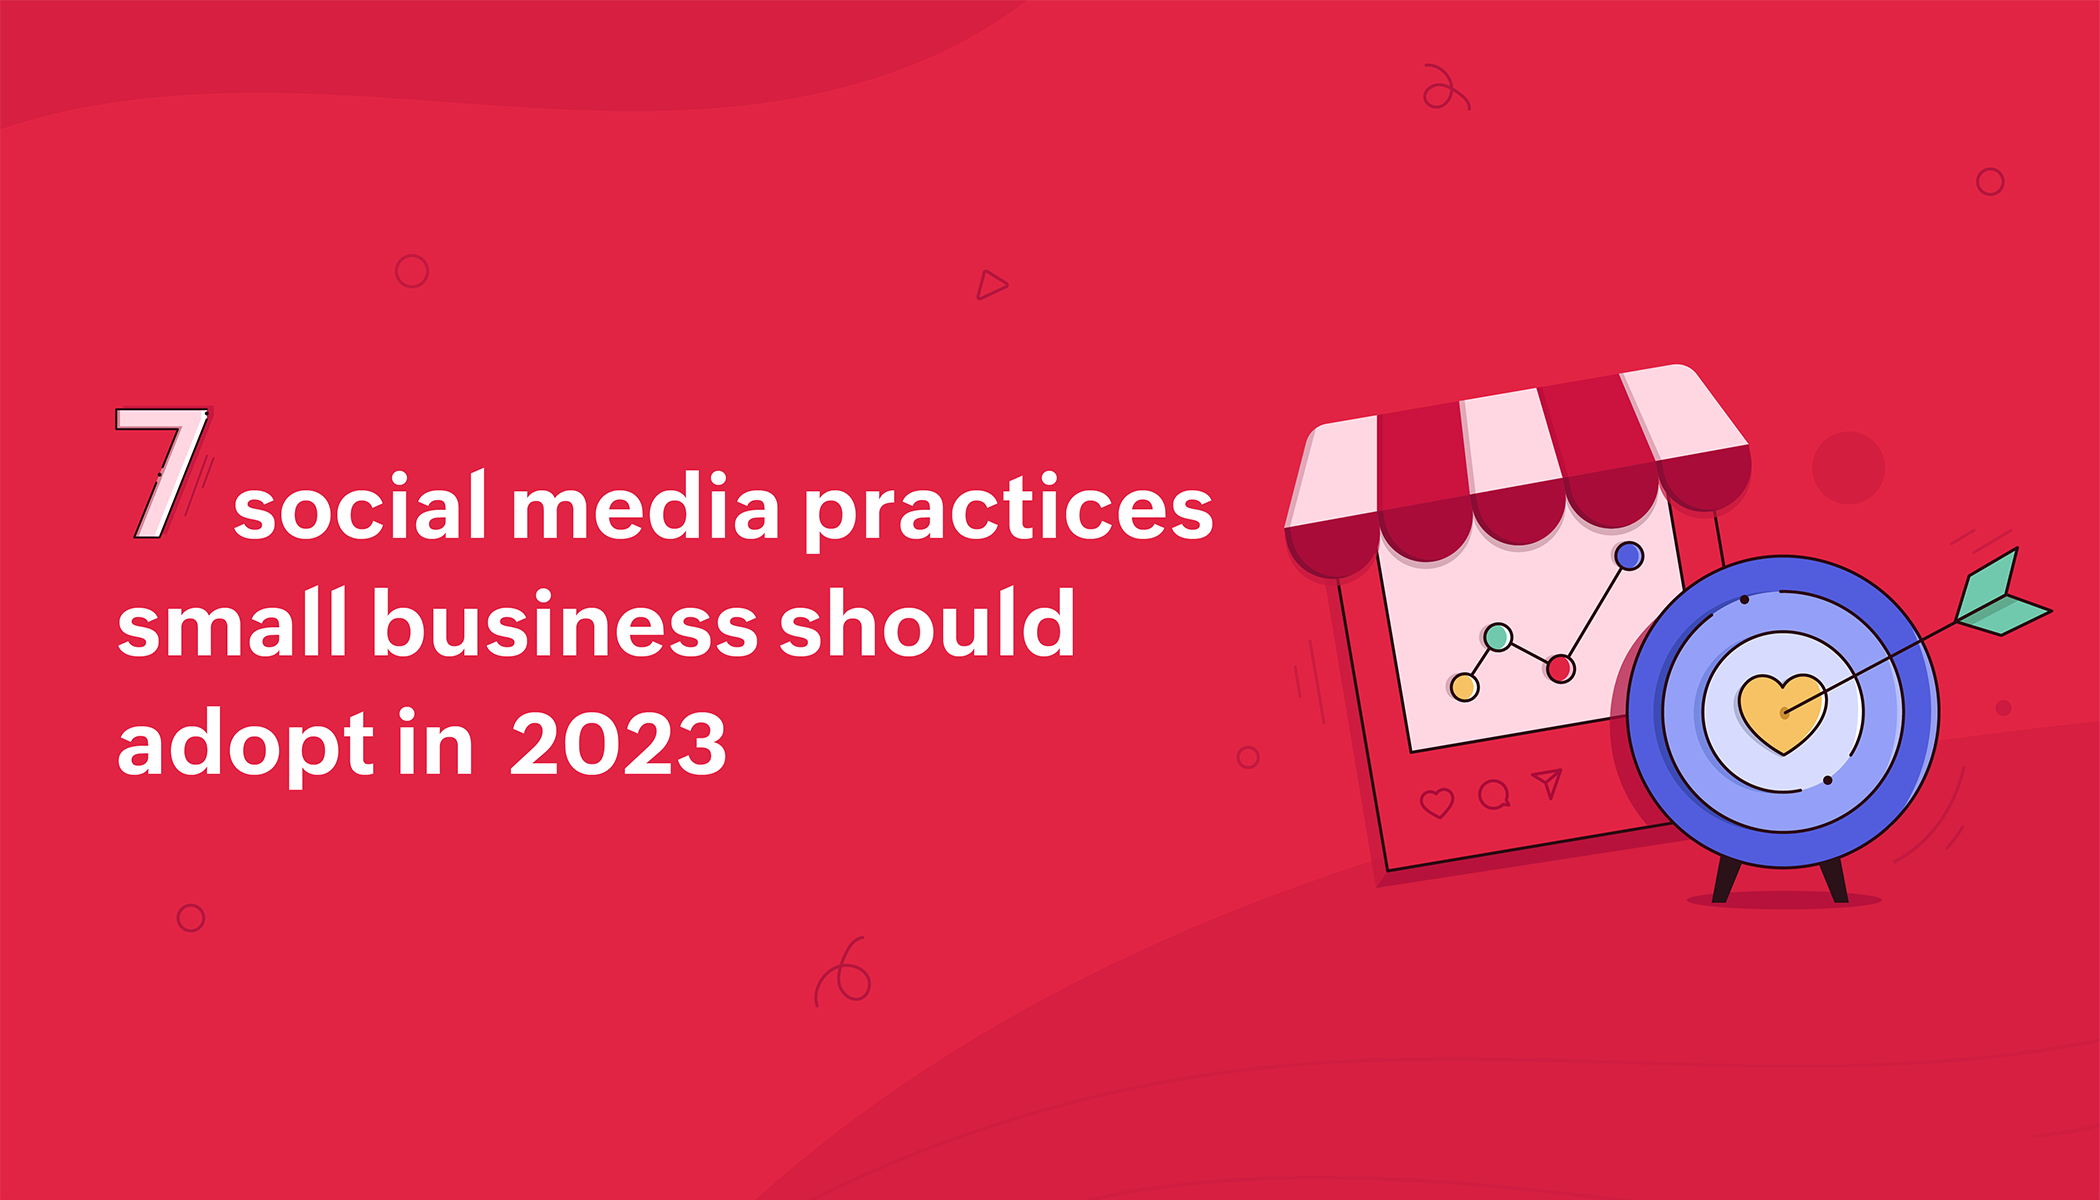 7 social media practices small businesses should adopt in 2023